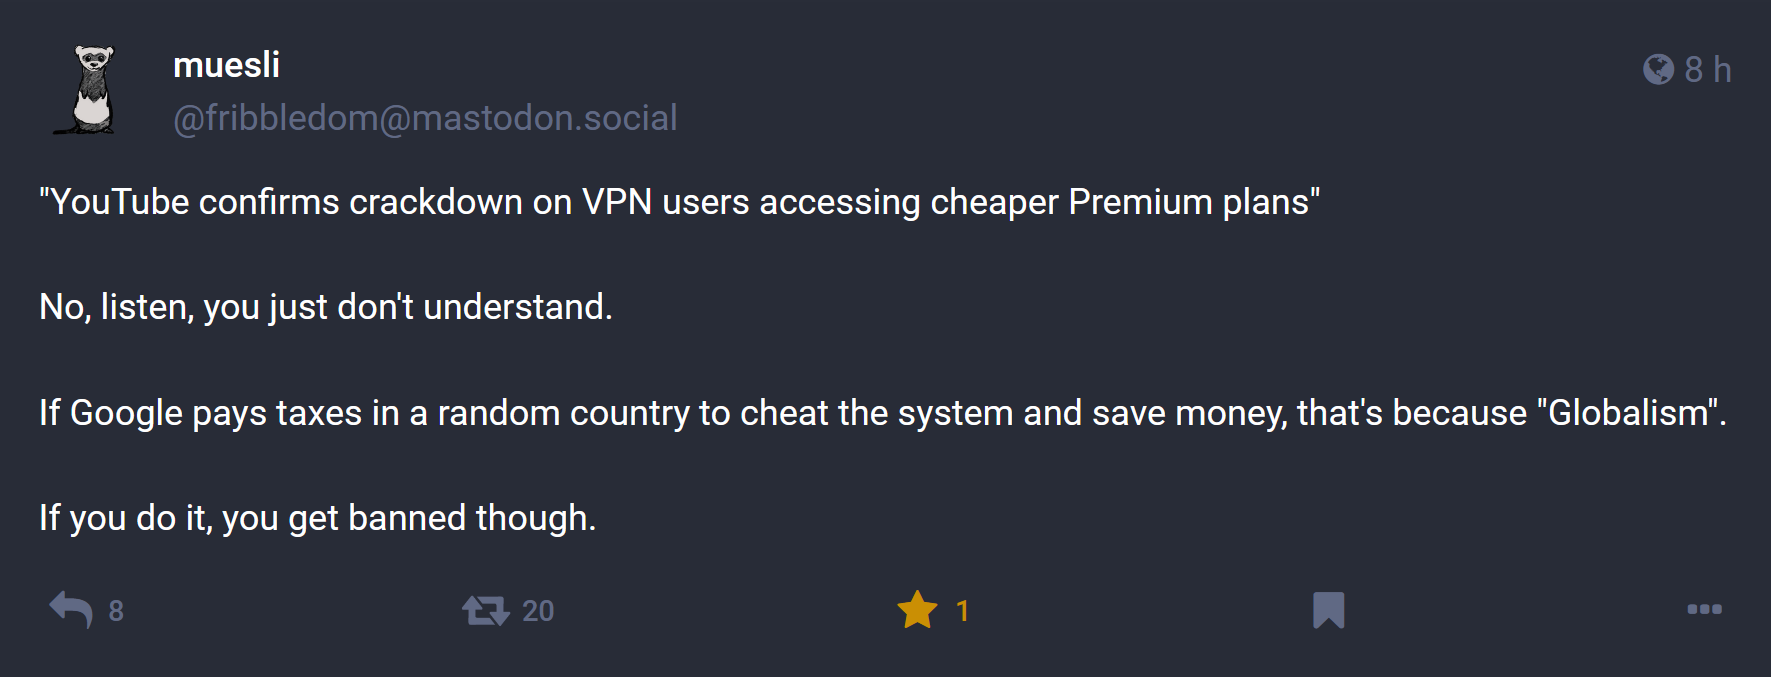 Toot by muesli (@fribbledom@mastodon.social):  / "YouTube confirms crackdown on VPN users accessing cheaper Premium plans" ¶  No, listen, you just don't understand. ¶  If Google pays taxes in a random country to cheat the system and save money, that's because "Globalism". ¶  If you do it, you get banned though.  / 8 replies, 20 shares, 1 like (liked).